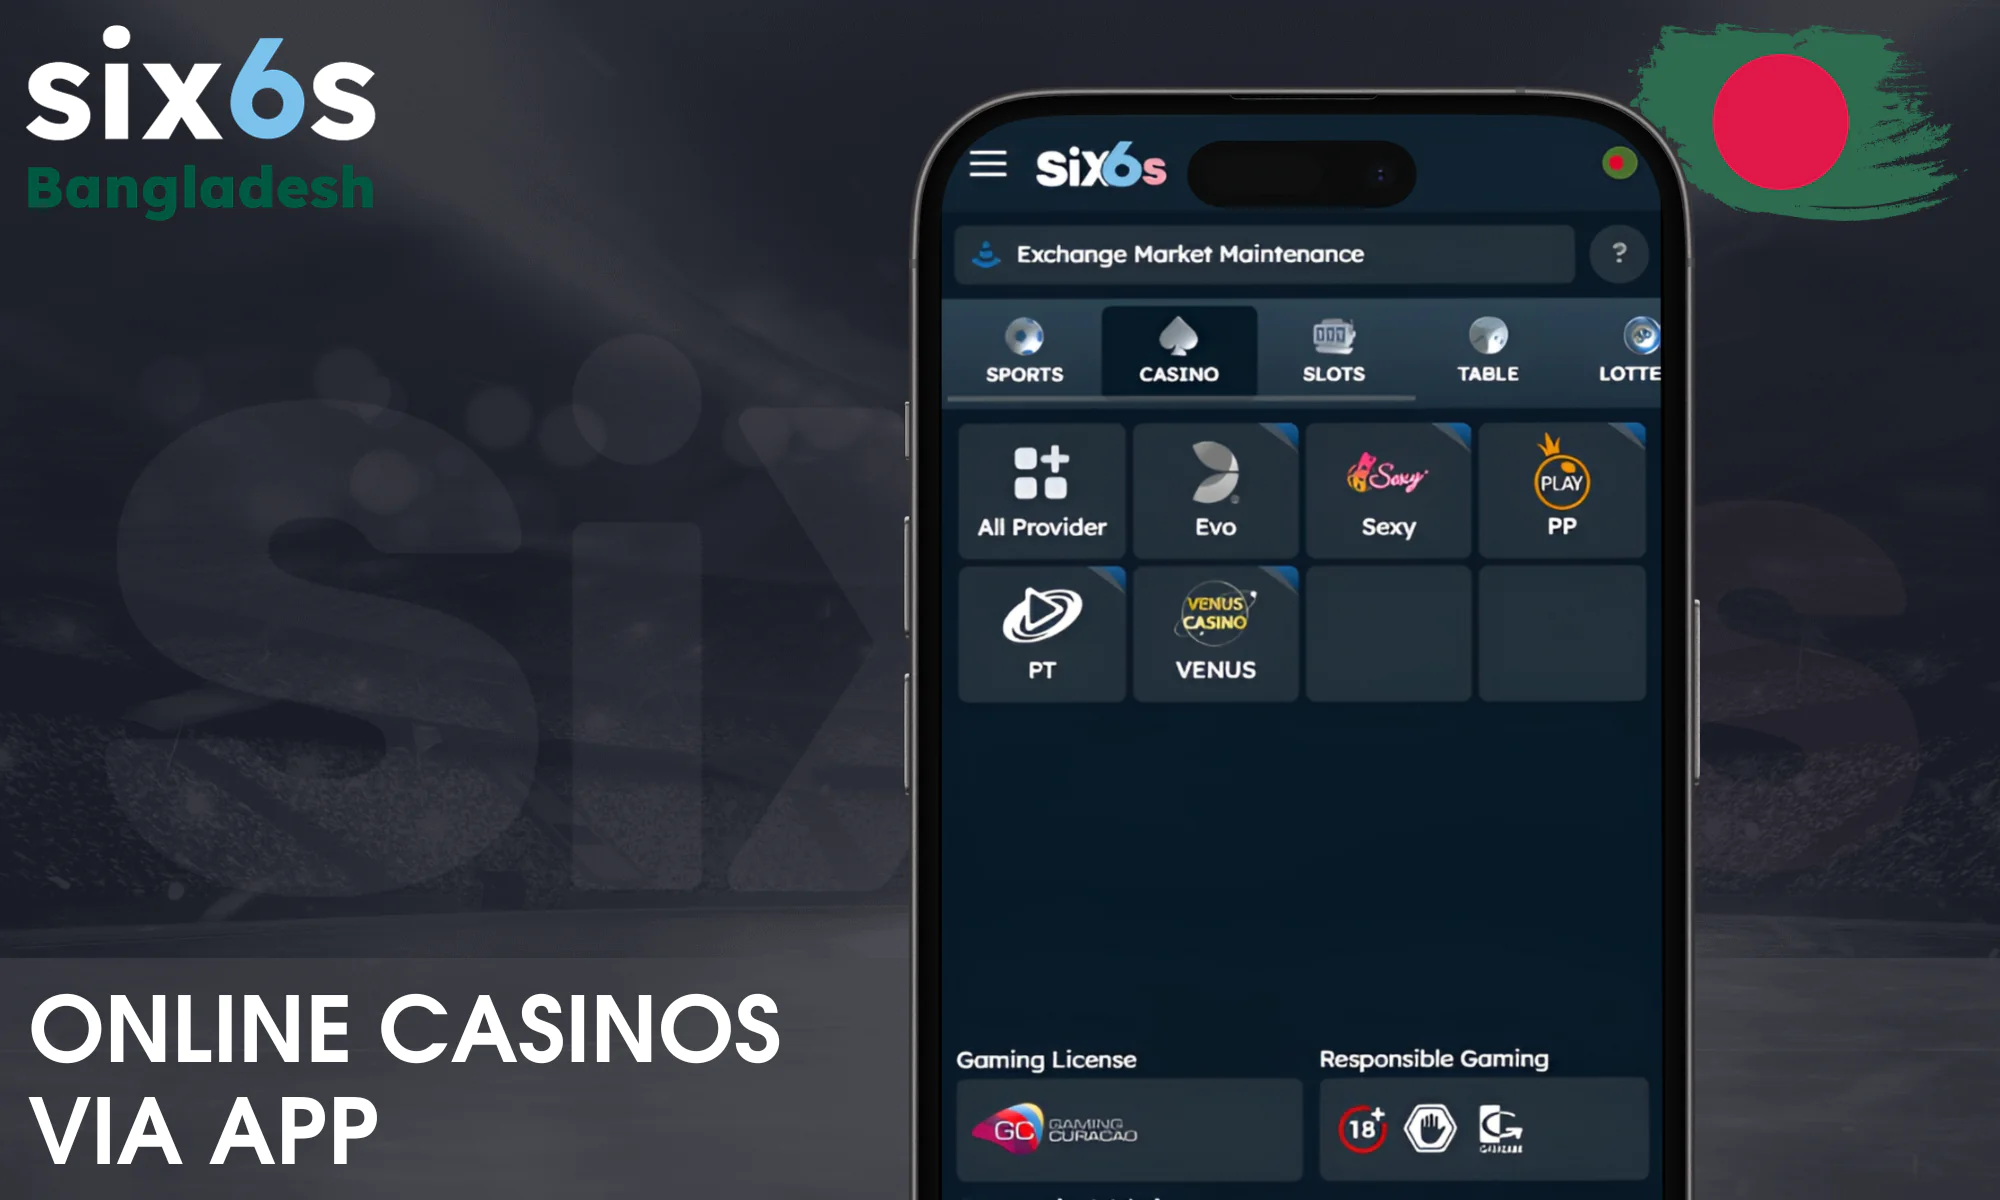 A wide range of slots available at Six6s online casino